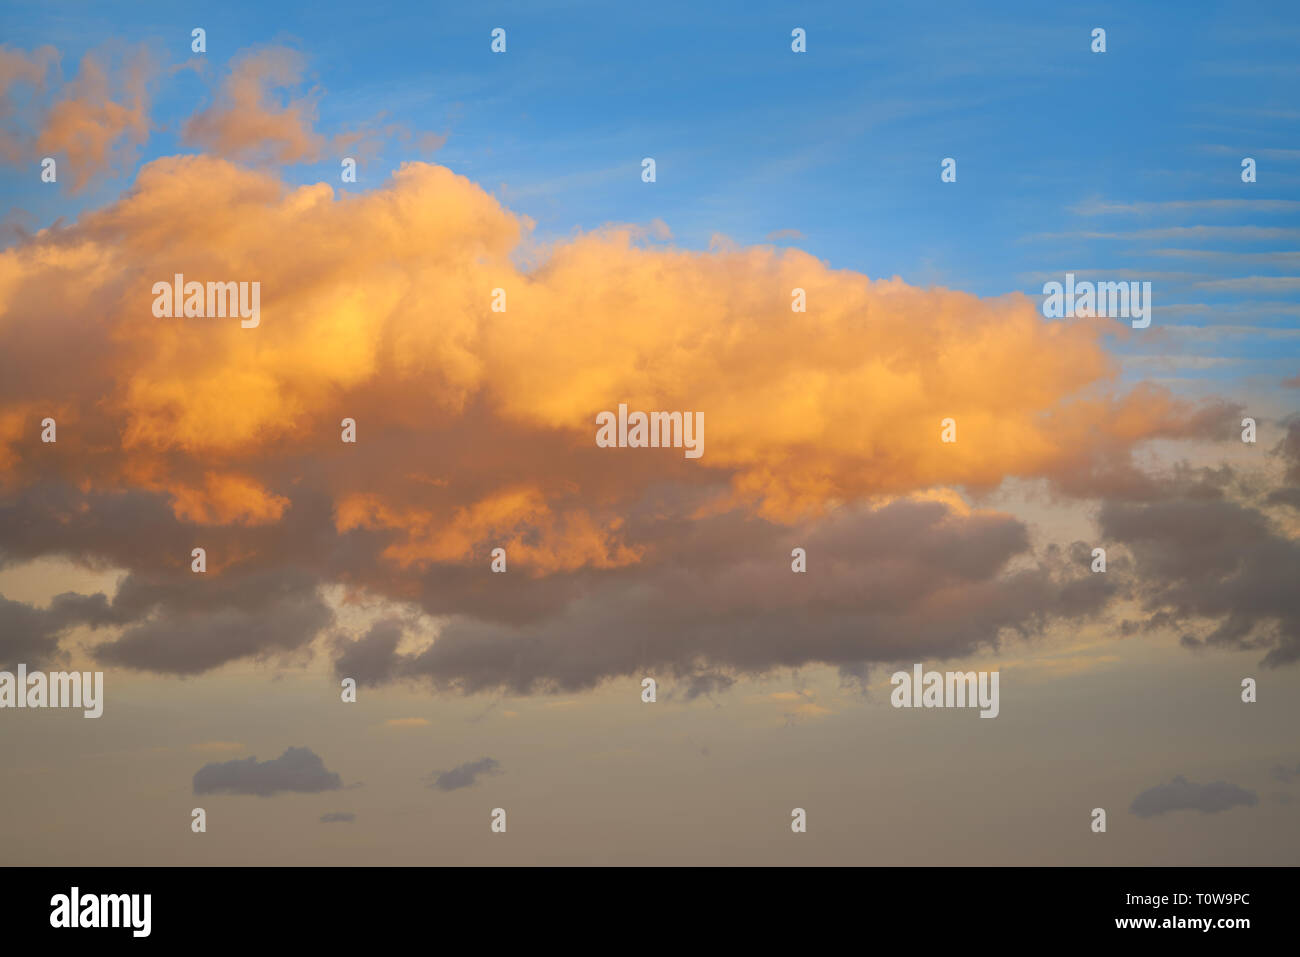 Sunset clouds in orange and blue sky background Stock Photo